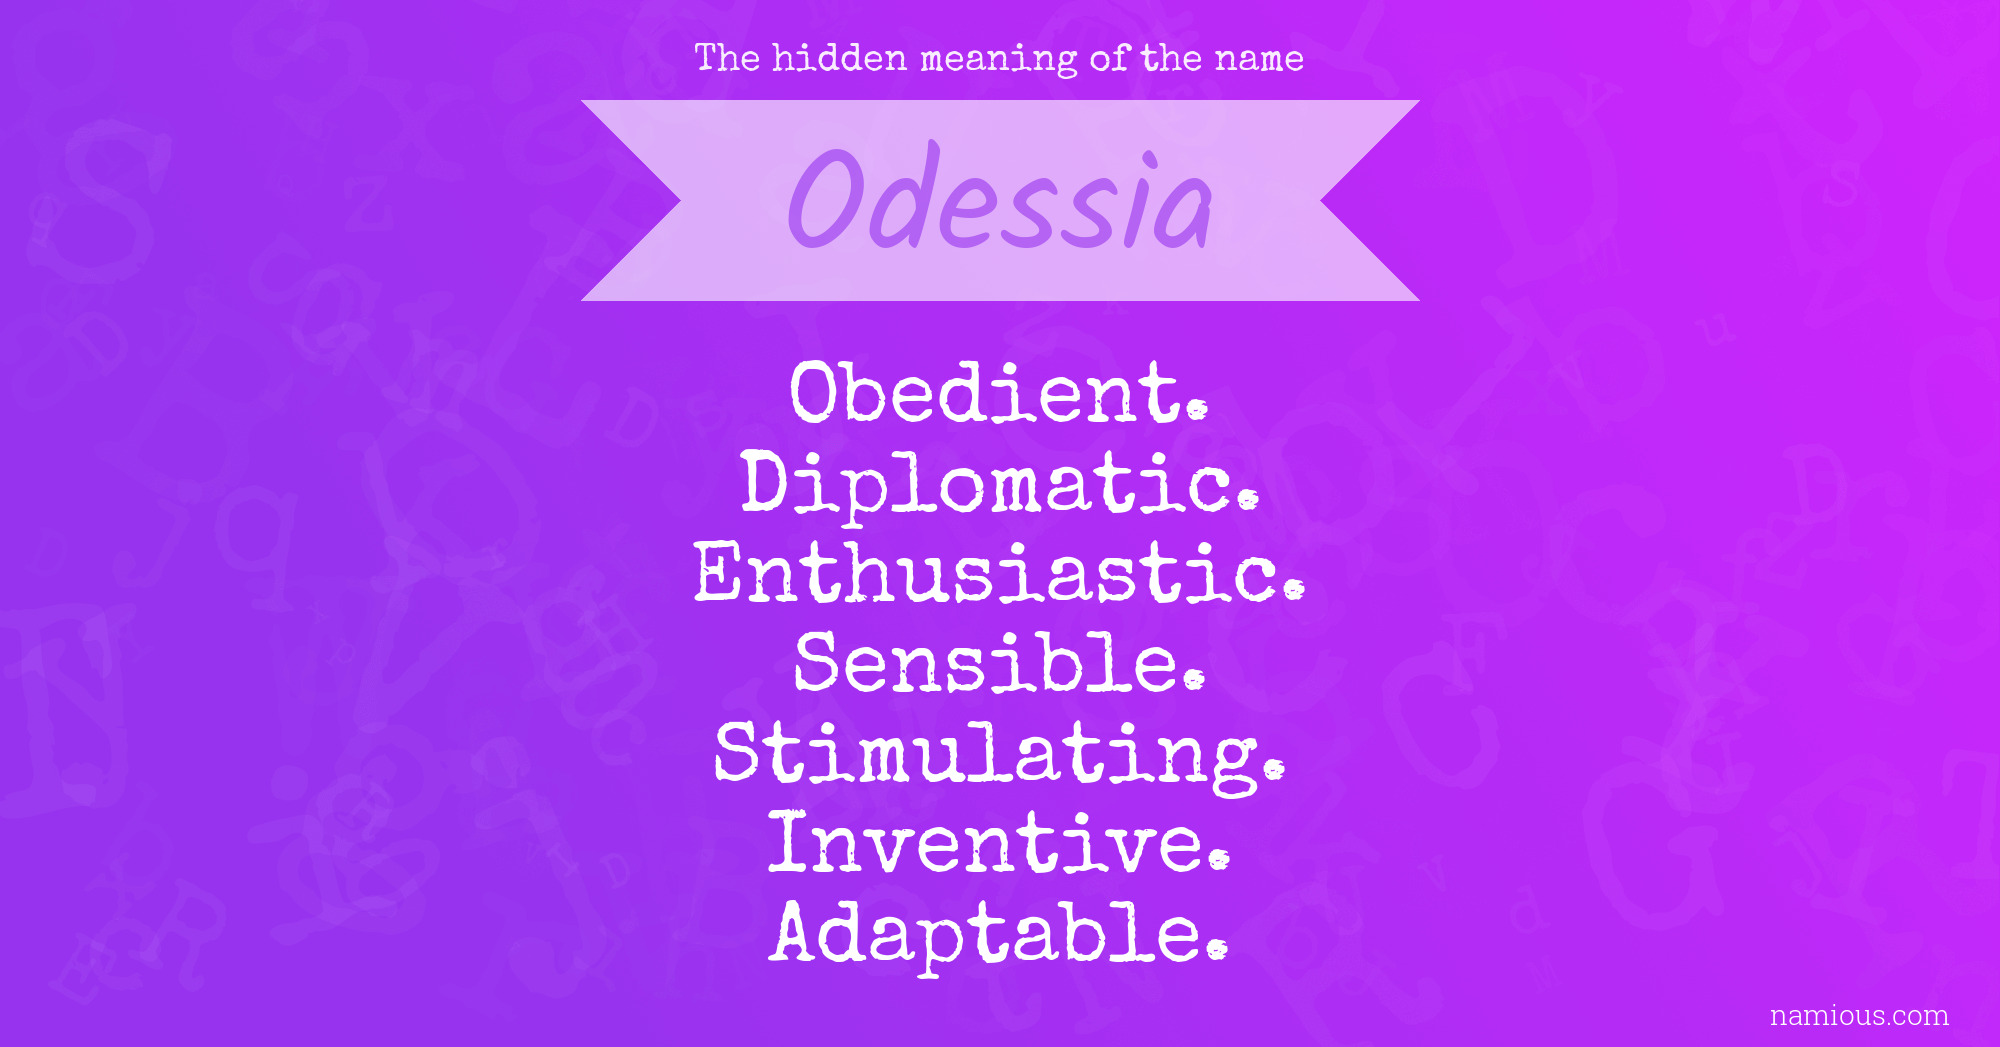 The hidden meaning of the name Odessia